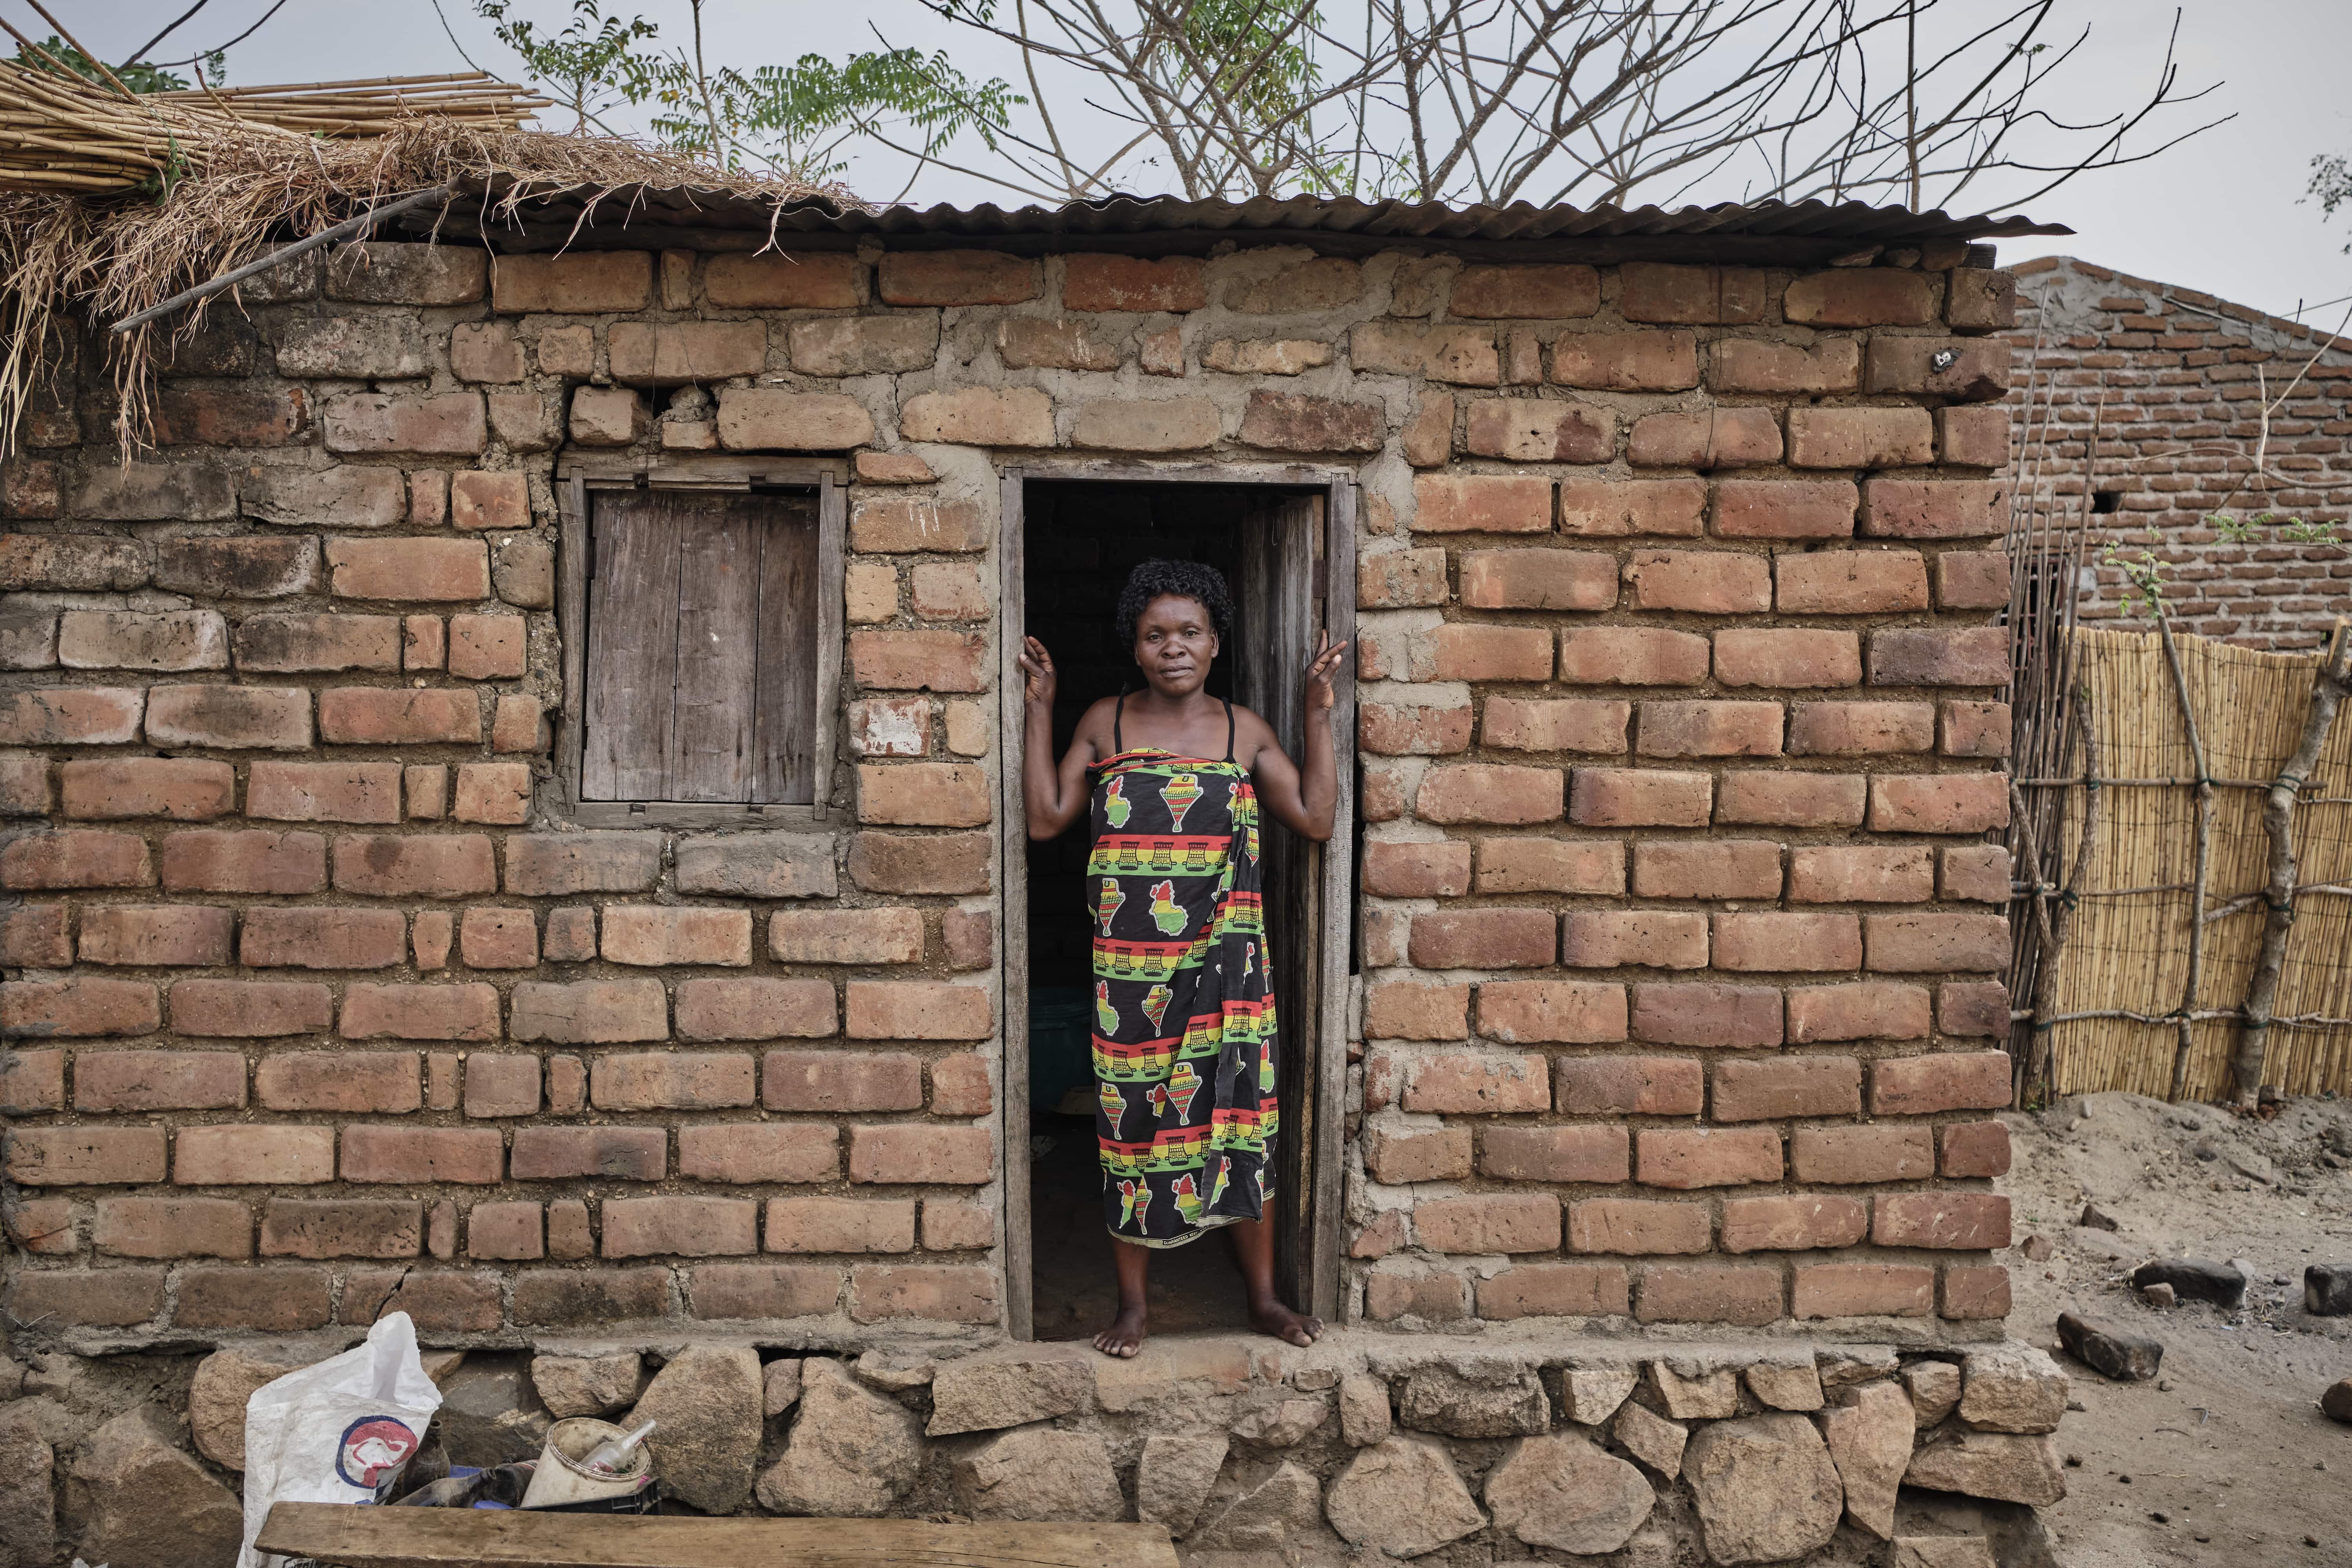 Sex Workers in Malawi: Agnes Rafael is 42 years old and has been engaged in sex work since 2008. Most women who become sex workers in Malawi do so because of poverty, lack of education or a difficult family situation. 